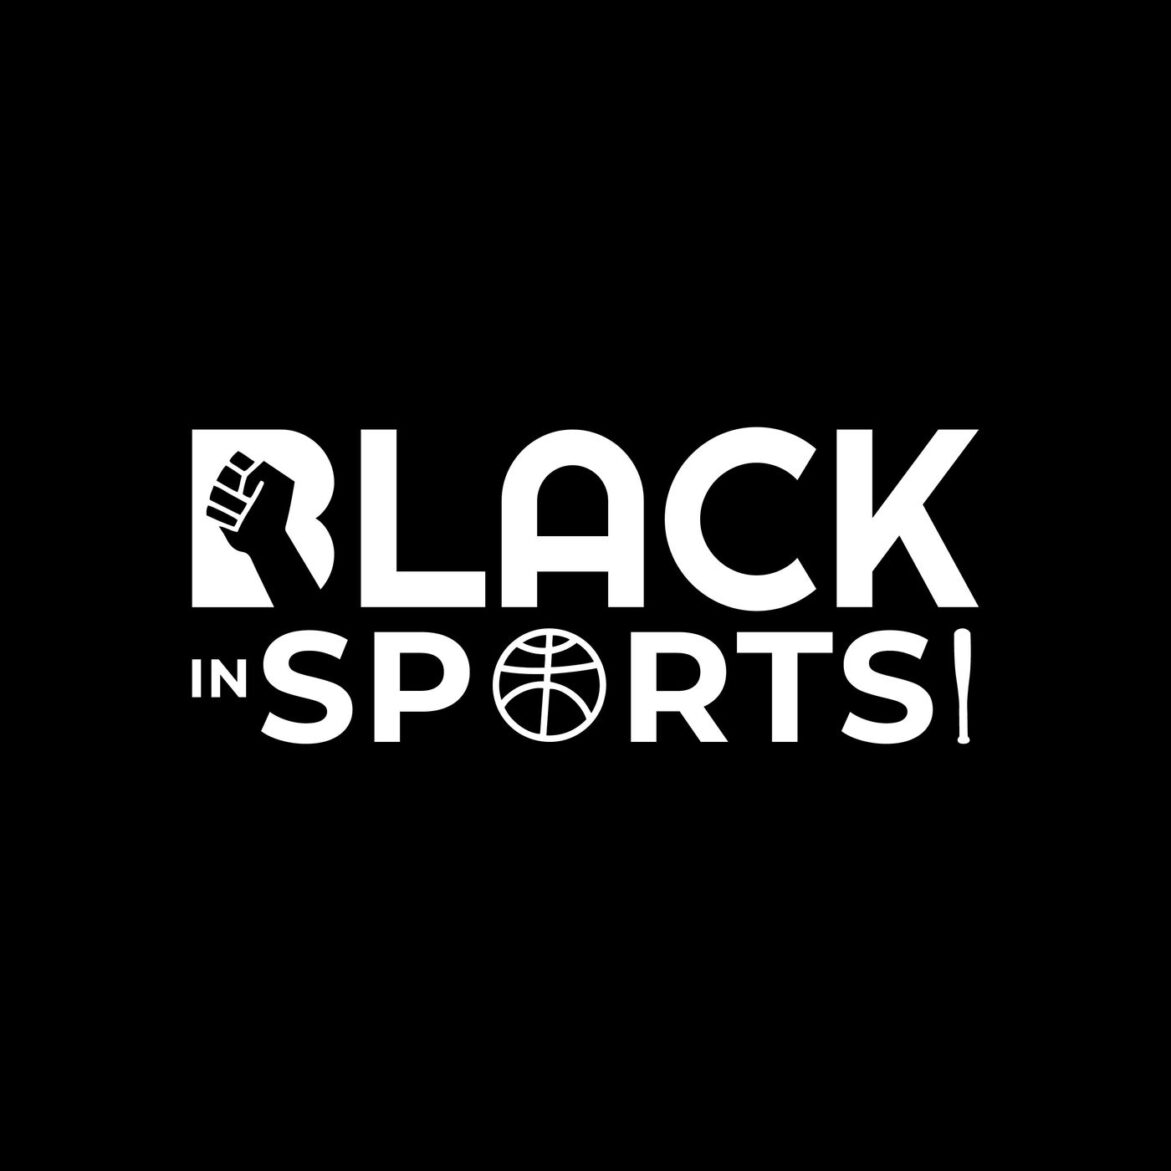 Black Podcasting - The Locker Room - S2 Ep 23 | Chef Curry w/the shot 2,974 & Counting  "Who Cares"?